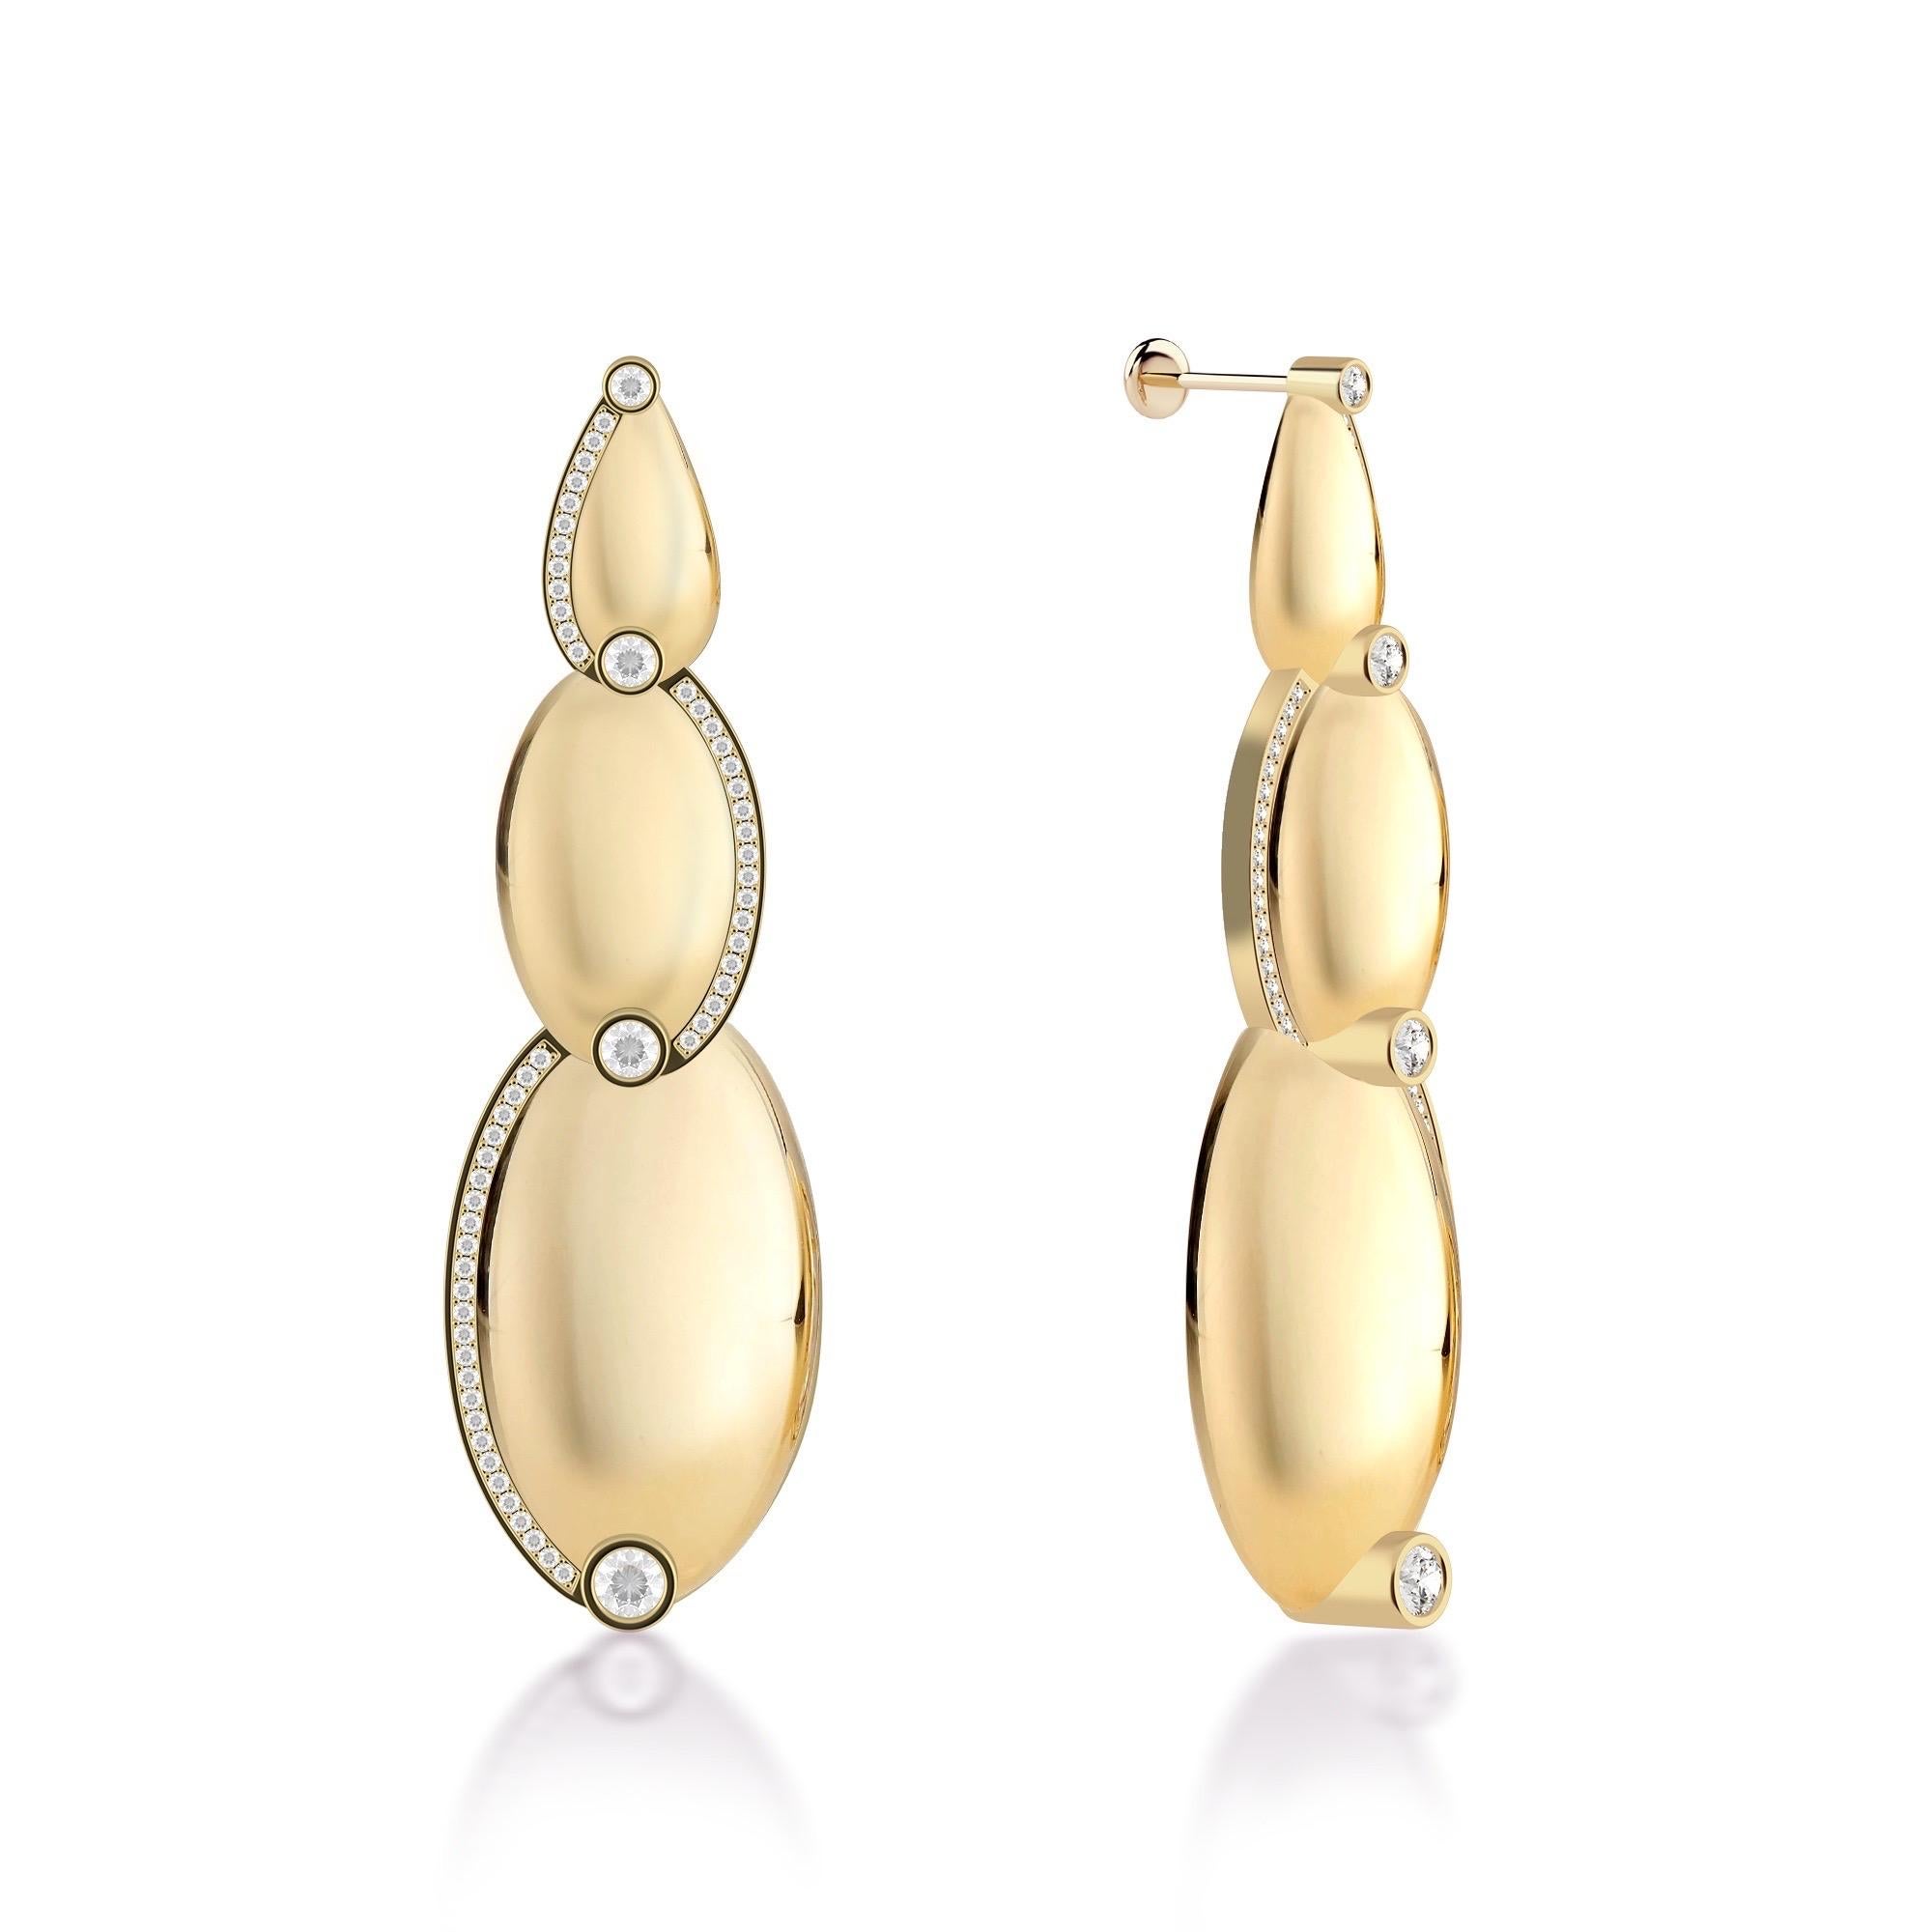 Contemporary Ruben Manuel “Summer” 18K 3 Oval Earrings with VS White Diamonds 2.13 Ctw For Sale